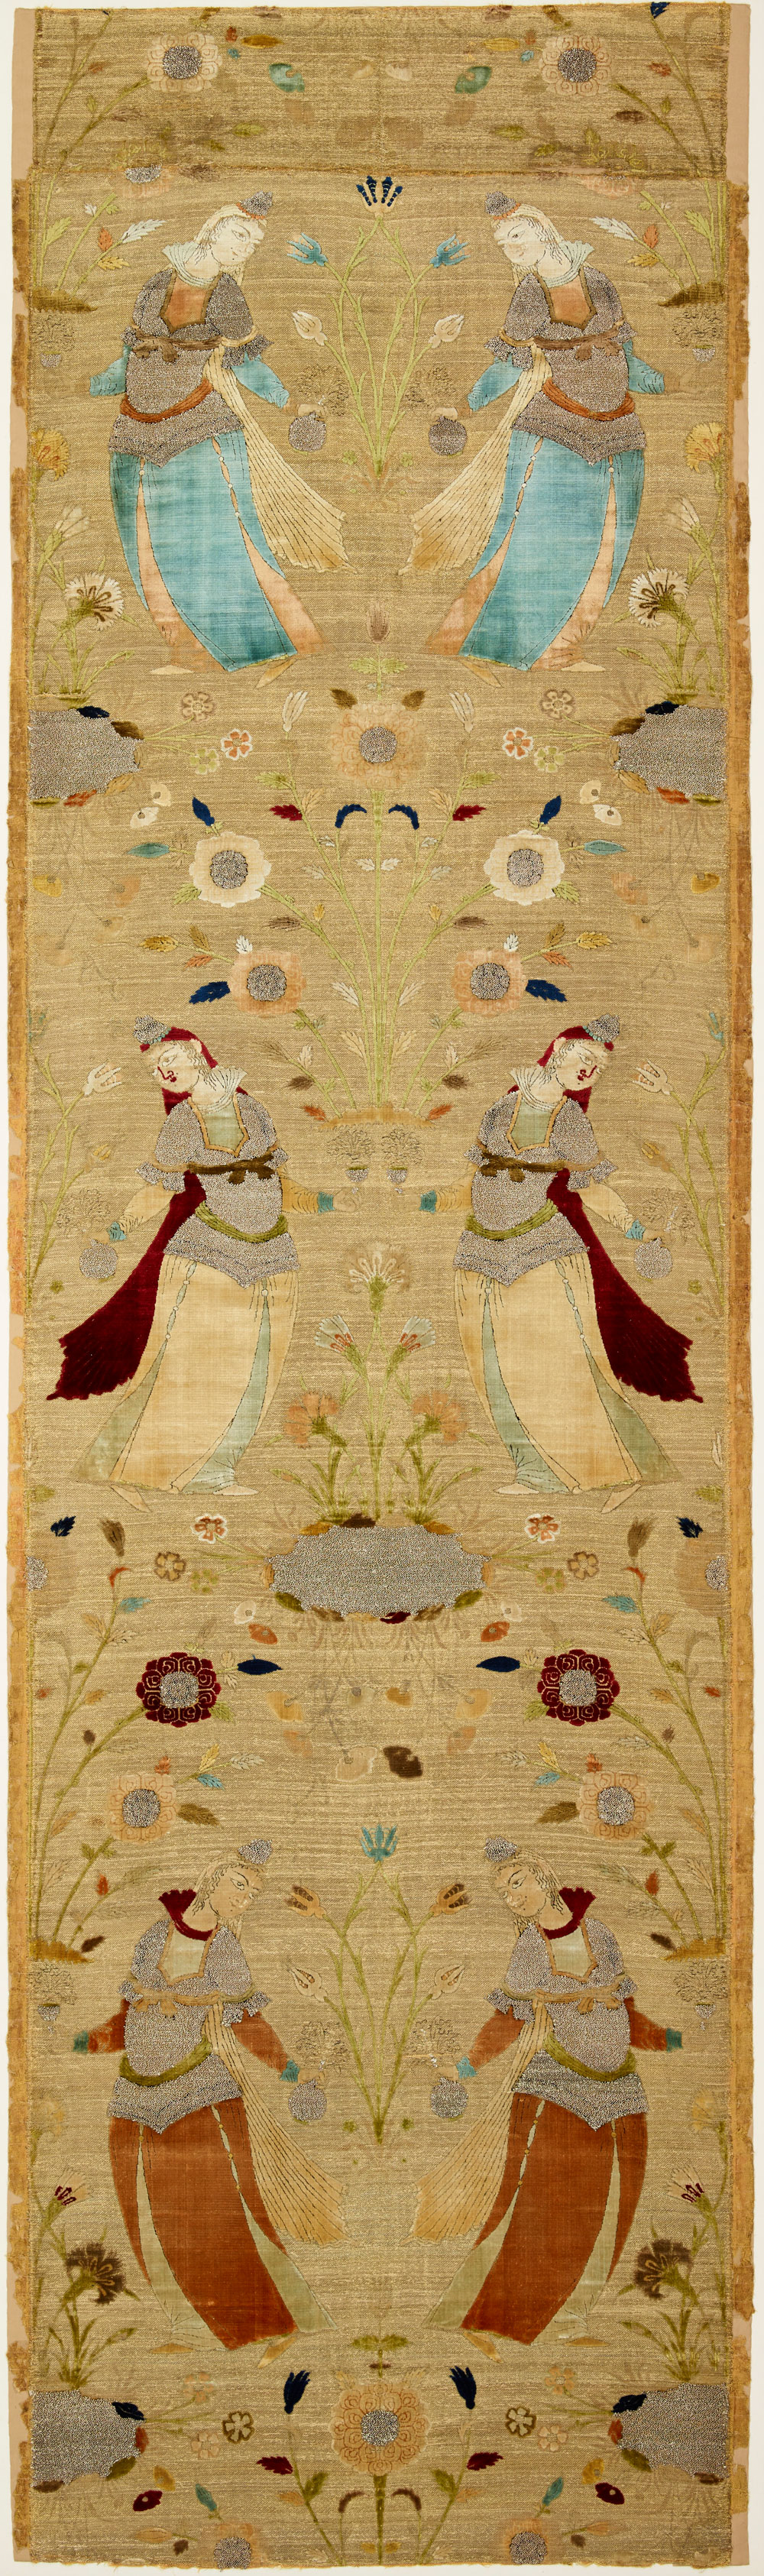 Textile fragment Iran, Isphahan (?), 17th–mid-17th century Velvet with ground brocade in gold Overall: 80 1/8 × 24 1/2 × 2 in. (2 m 3.52 cm × 62.23 cm × 5.08 cm) The Keir Collection of Islamic Art on loan to the Dallas Museum of Art, K.1.2014.621